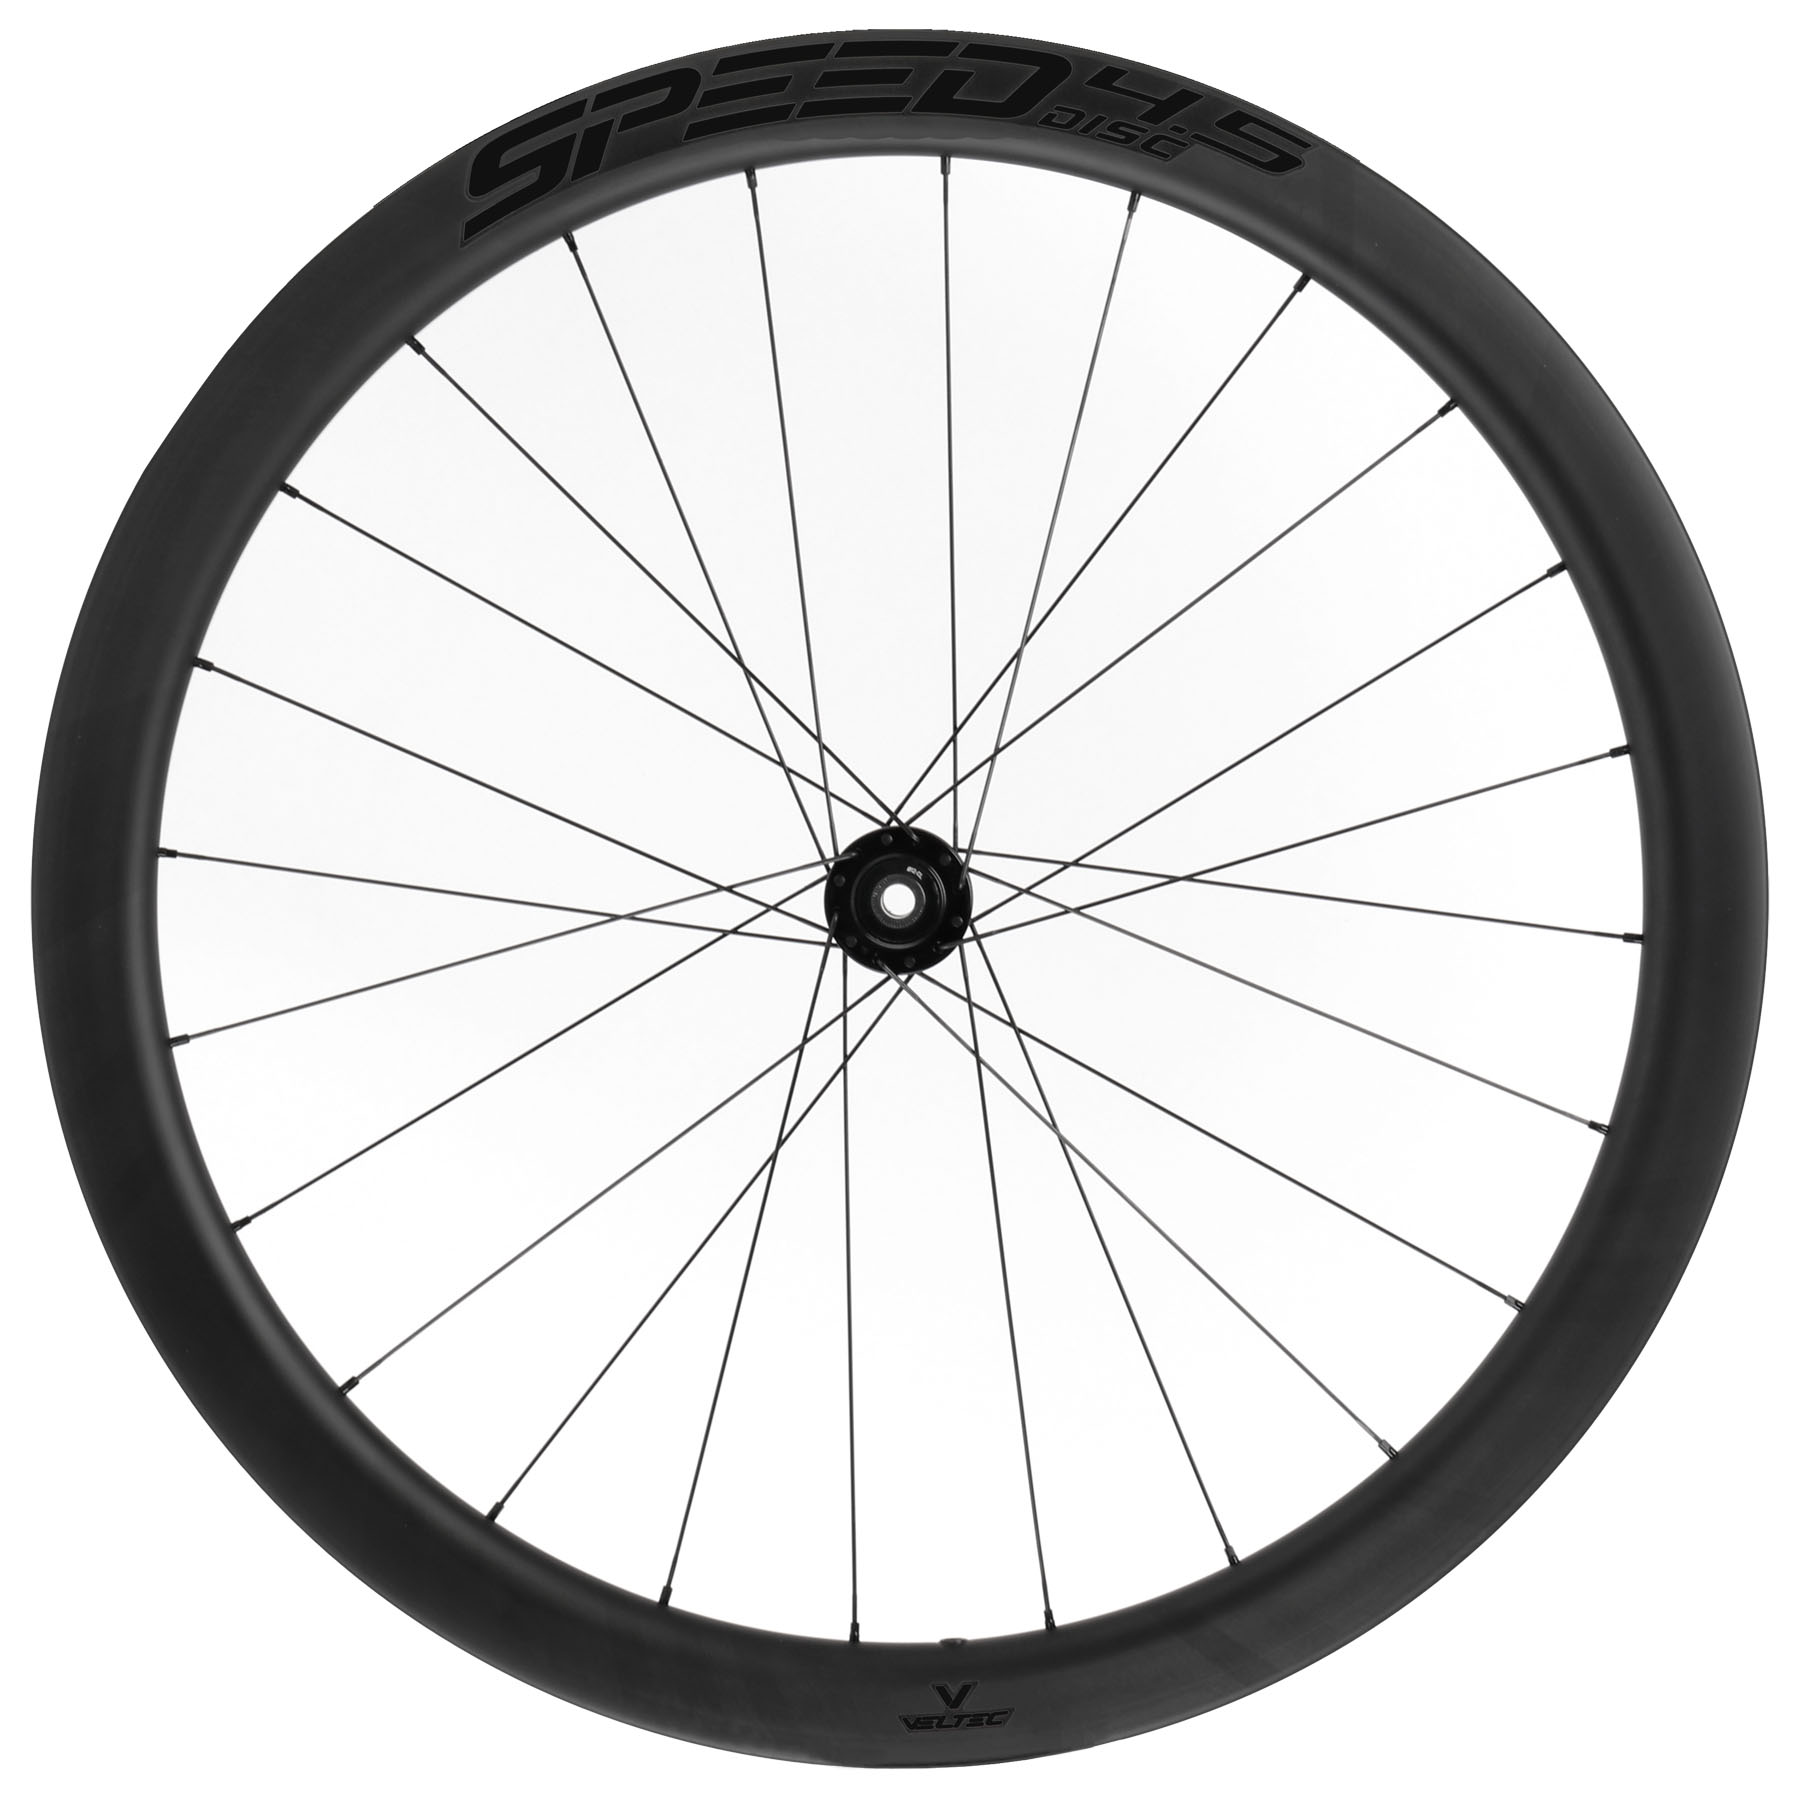 Picture of Veltec Speed 4.5 Disc Carbon Front Wheel - Clincher - 12x100mm - black with black decals